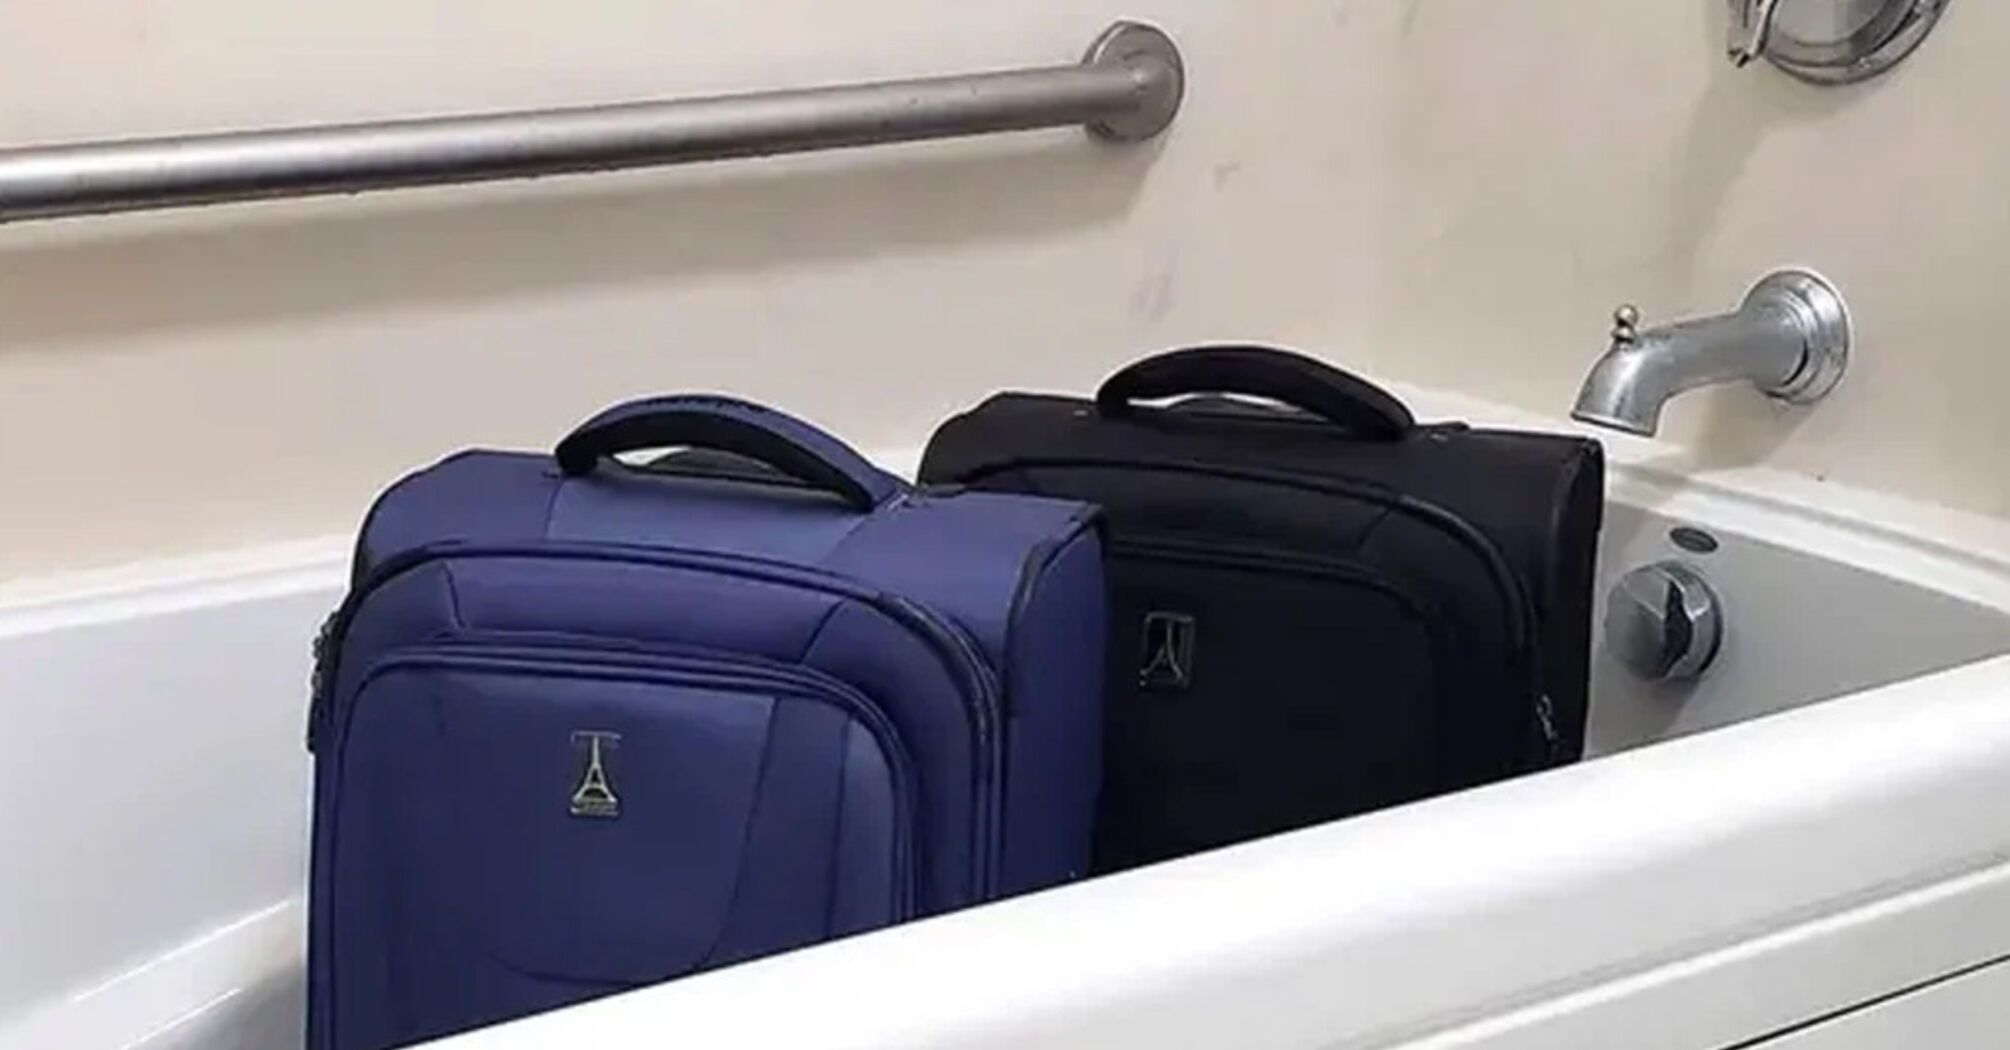 Why put your luggage in the bathtub in your hotel room